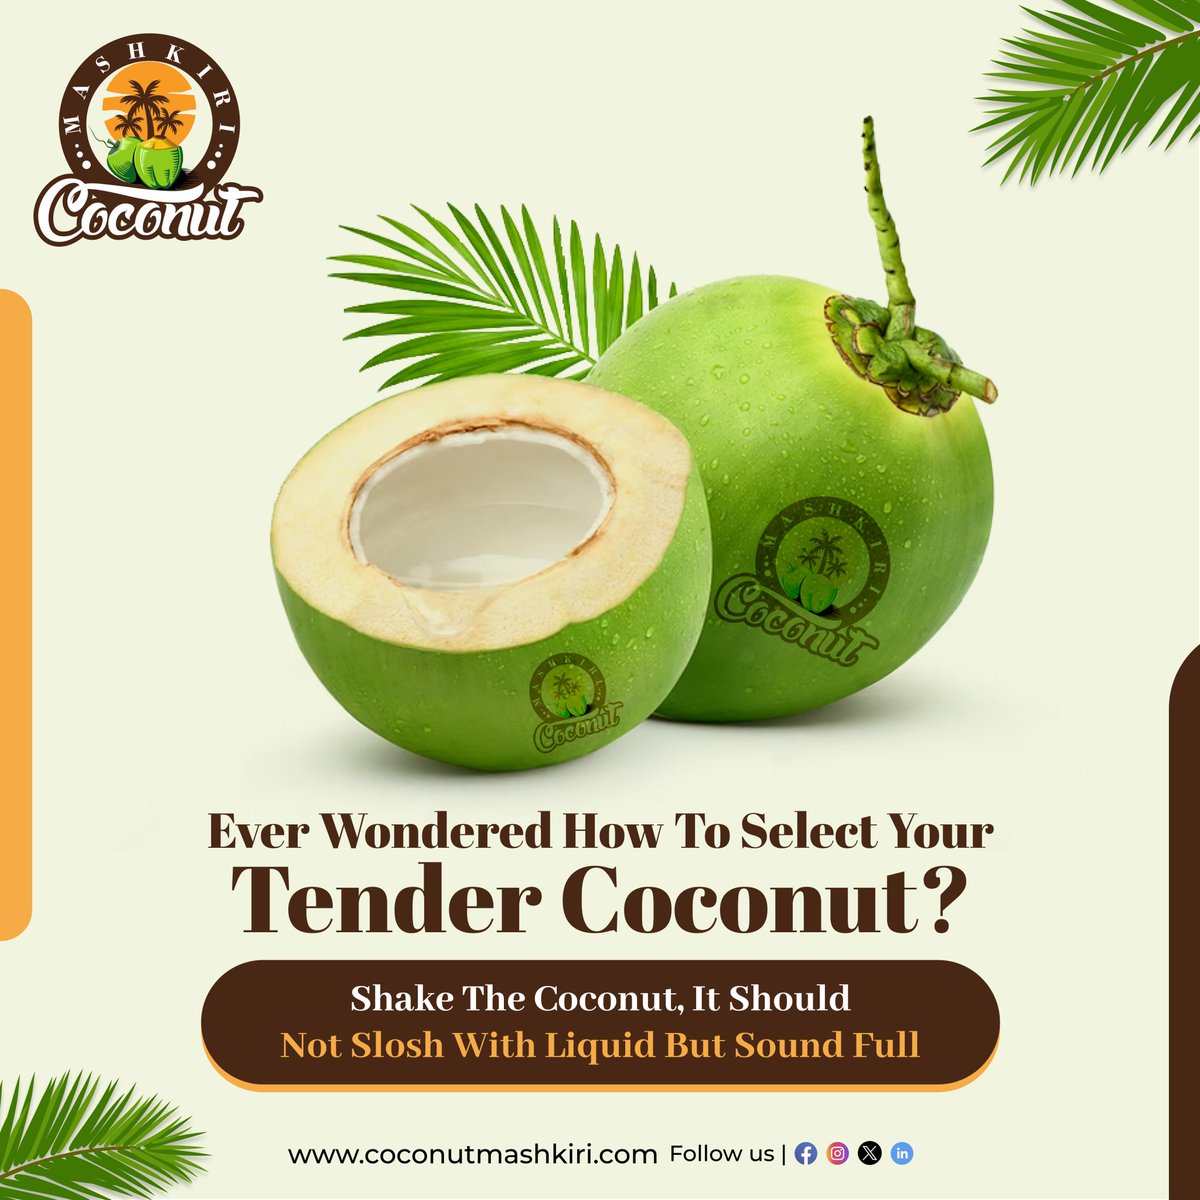 🥥 Discover the secret to picking the perfect tender coconut! 🌴

Shake it gently - if it's full and not sloshing with liquid, you've found your match! 

Follow our page to know more!
.
.
.
#tendercoconut #tendercoconutwater #tendercoconuts #coconutwater #coco #hydration